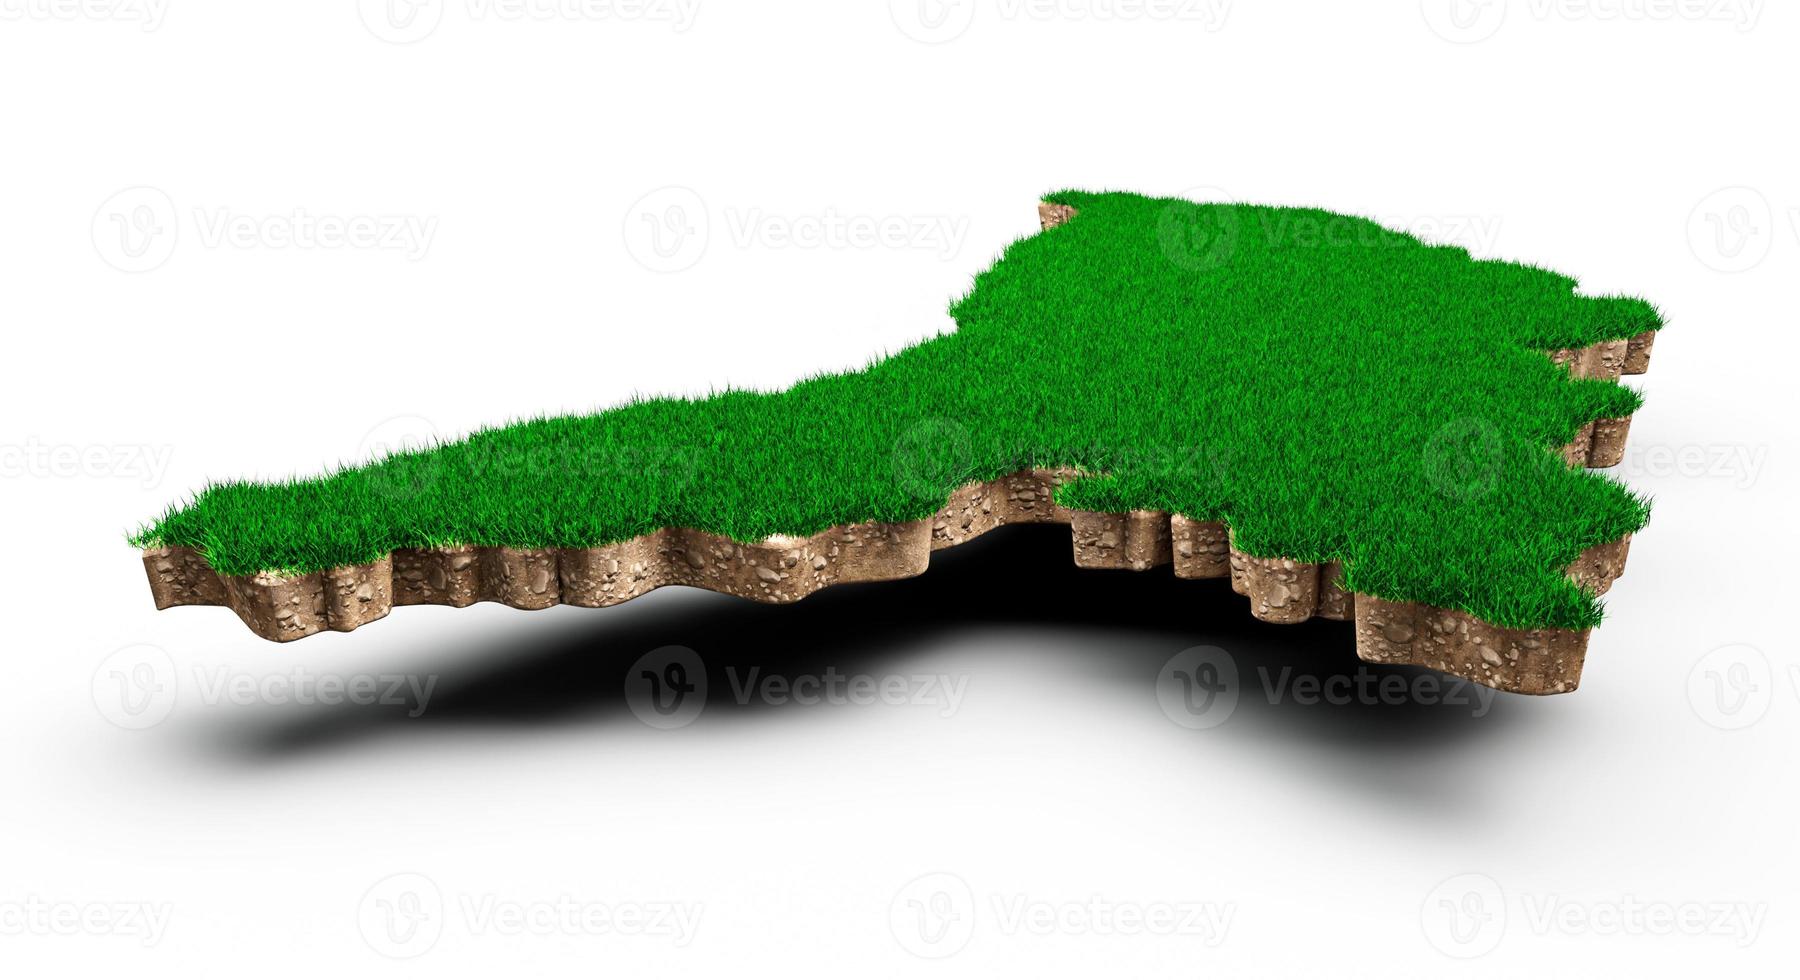 Moldova Map soil land geology cross section with green grass and Rock ground texture 3d illustration photo